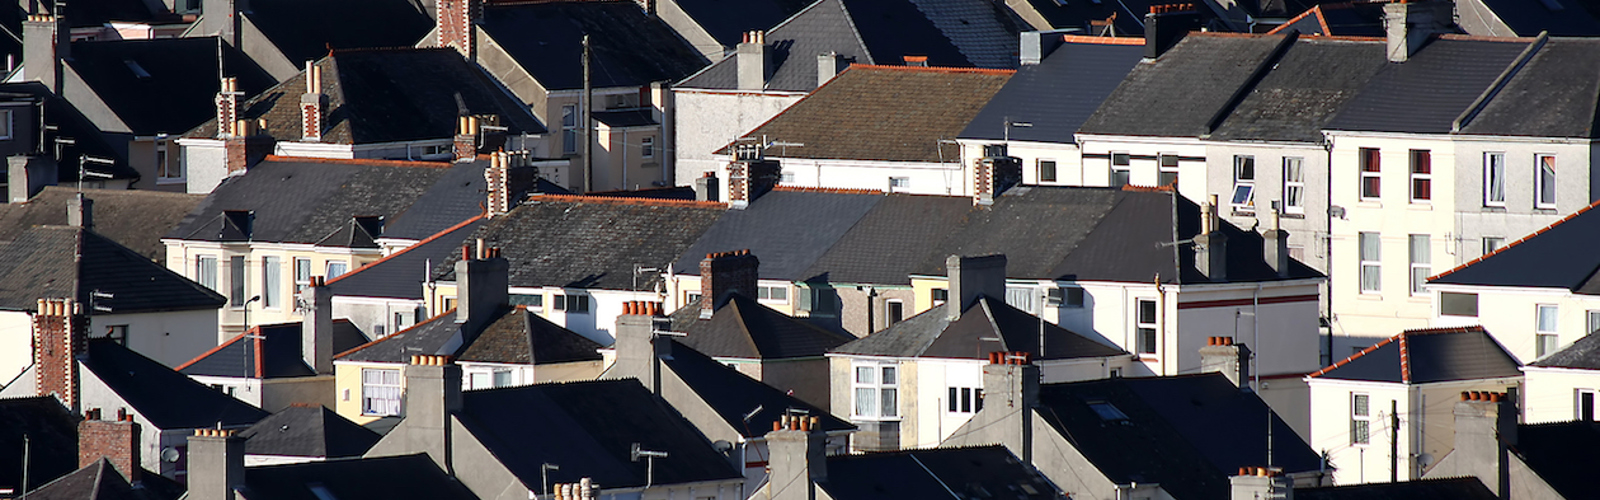 A view over rooftops in Plymouth, UK